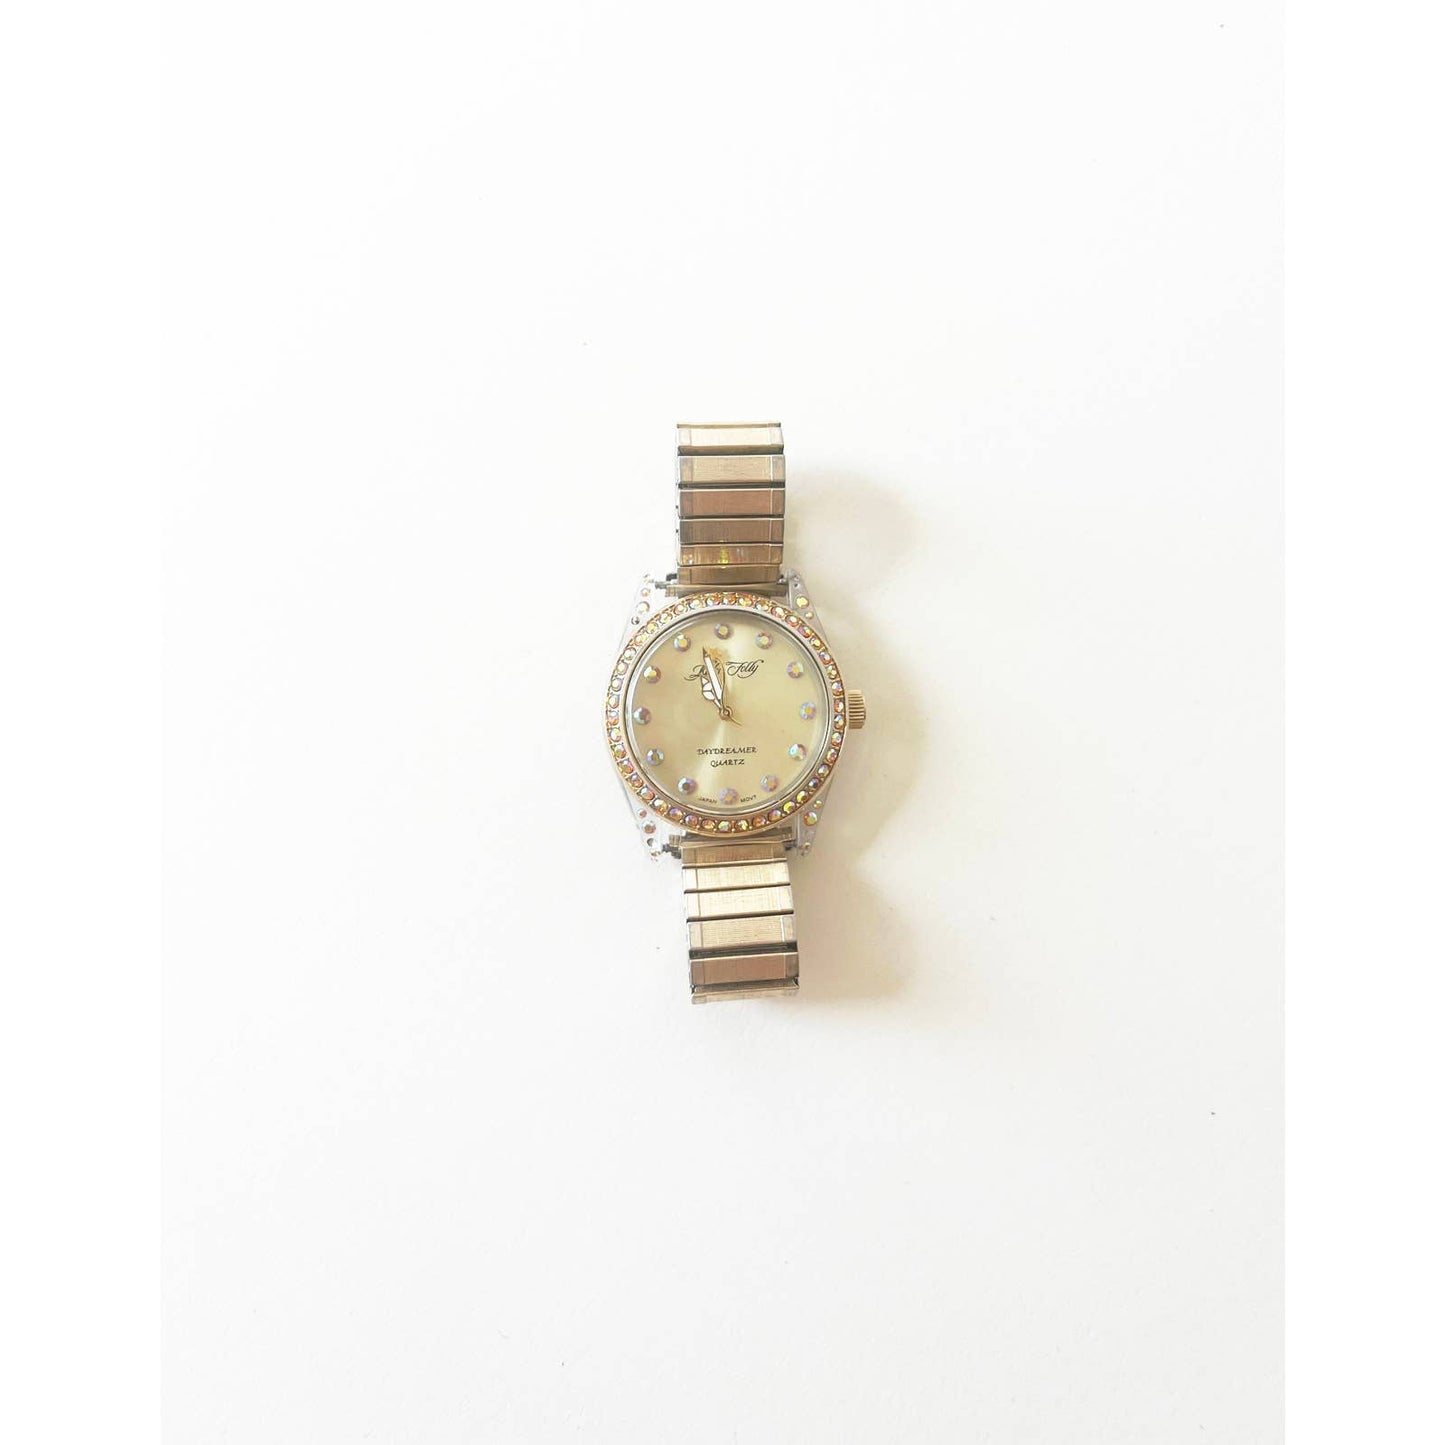 Vintage Kirks Folly Gold Watch with Stone Details